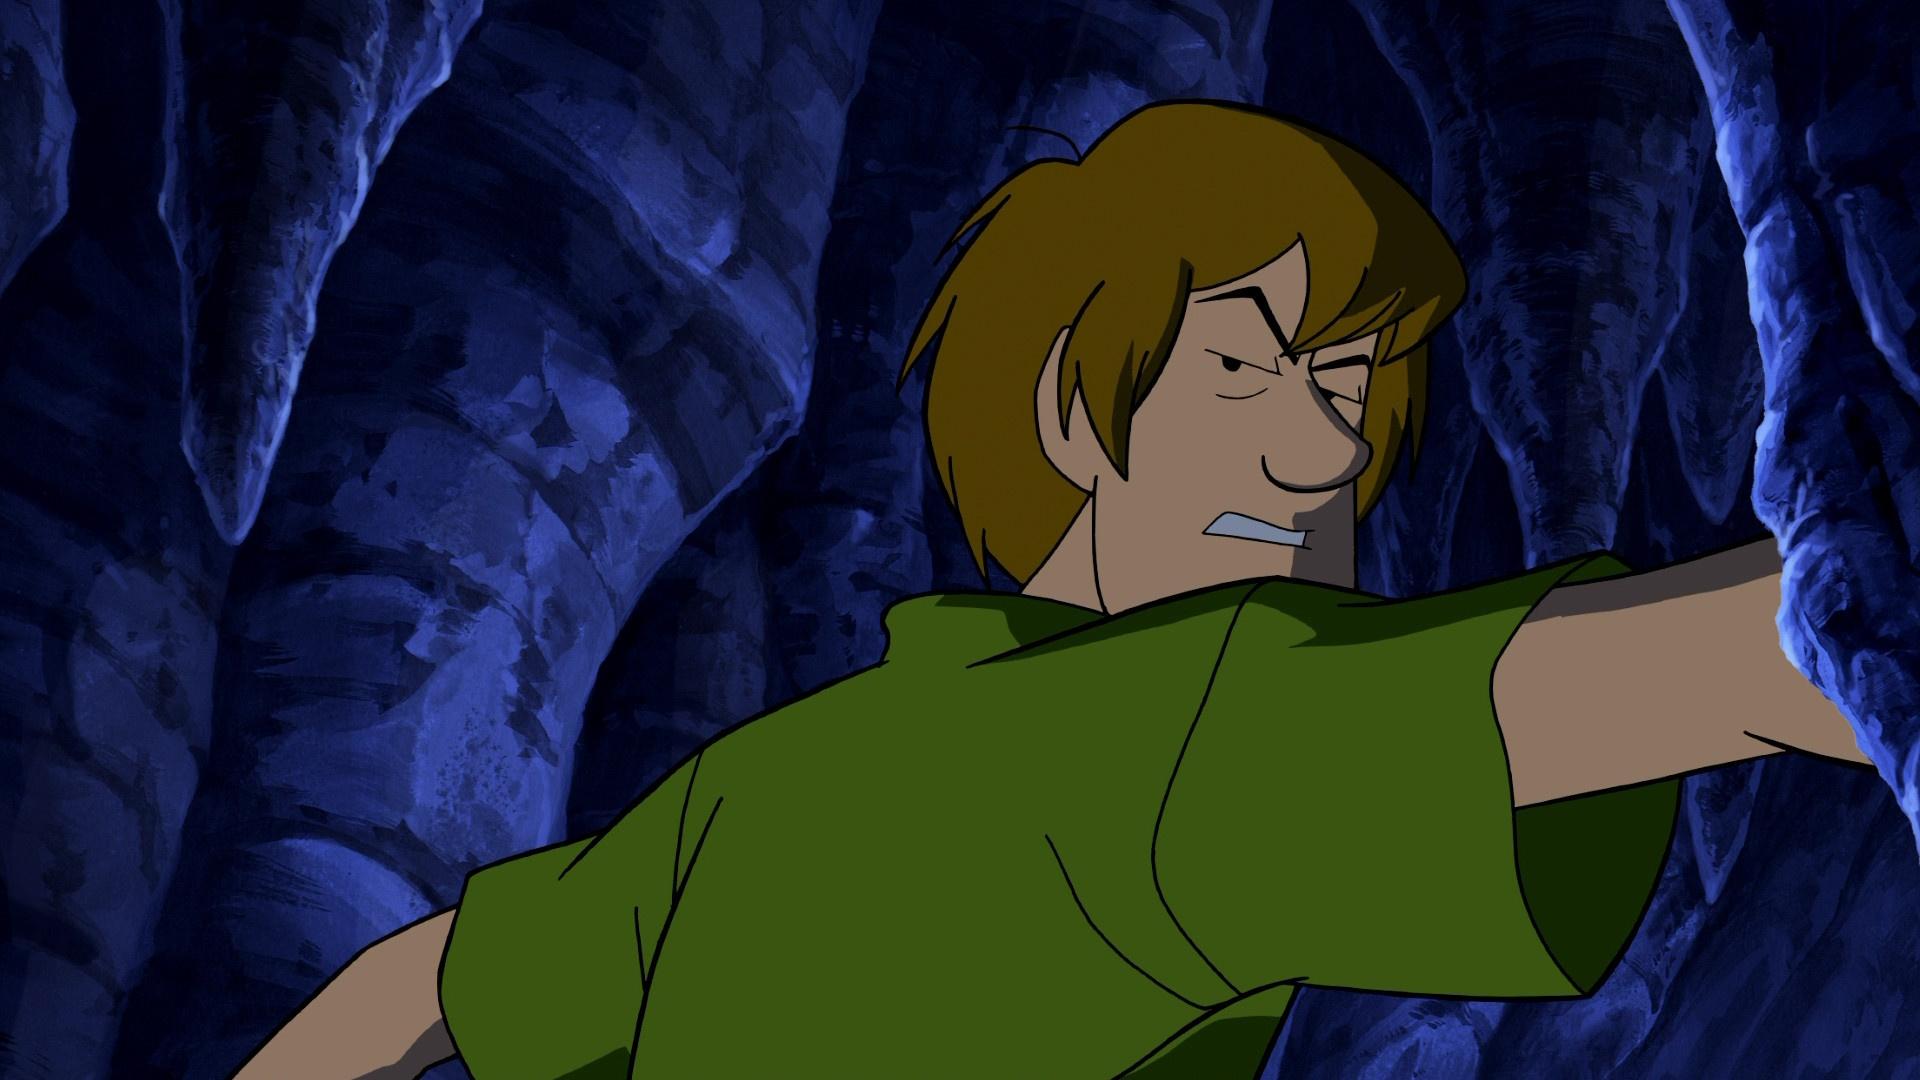 Like, Shaggy Isn't Going to Be in Mortal Kombat So Cool It